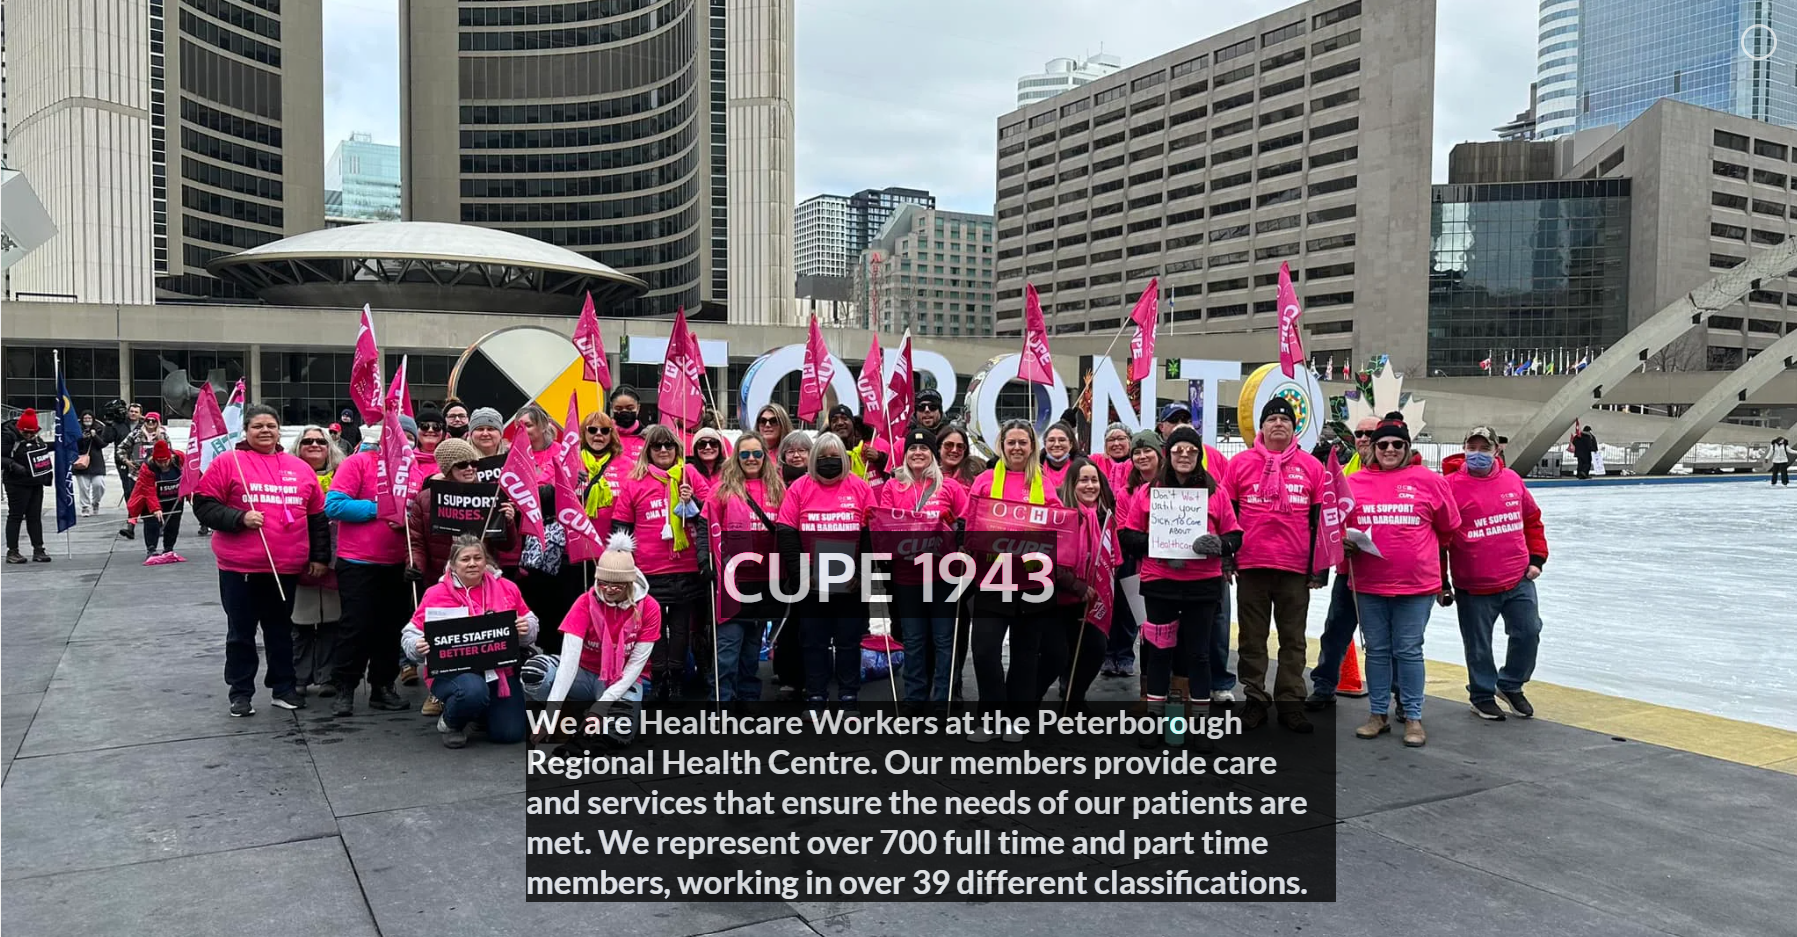 CUPE 1943